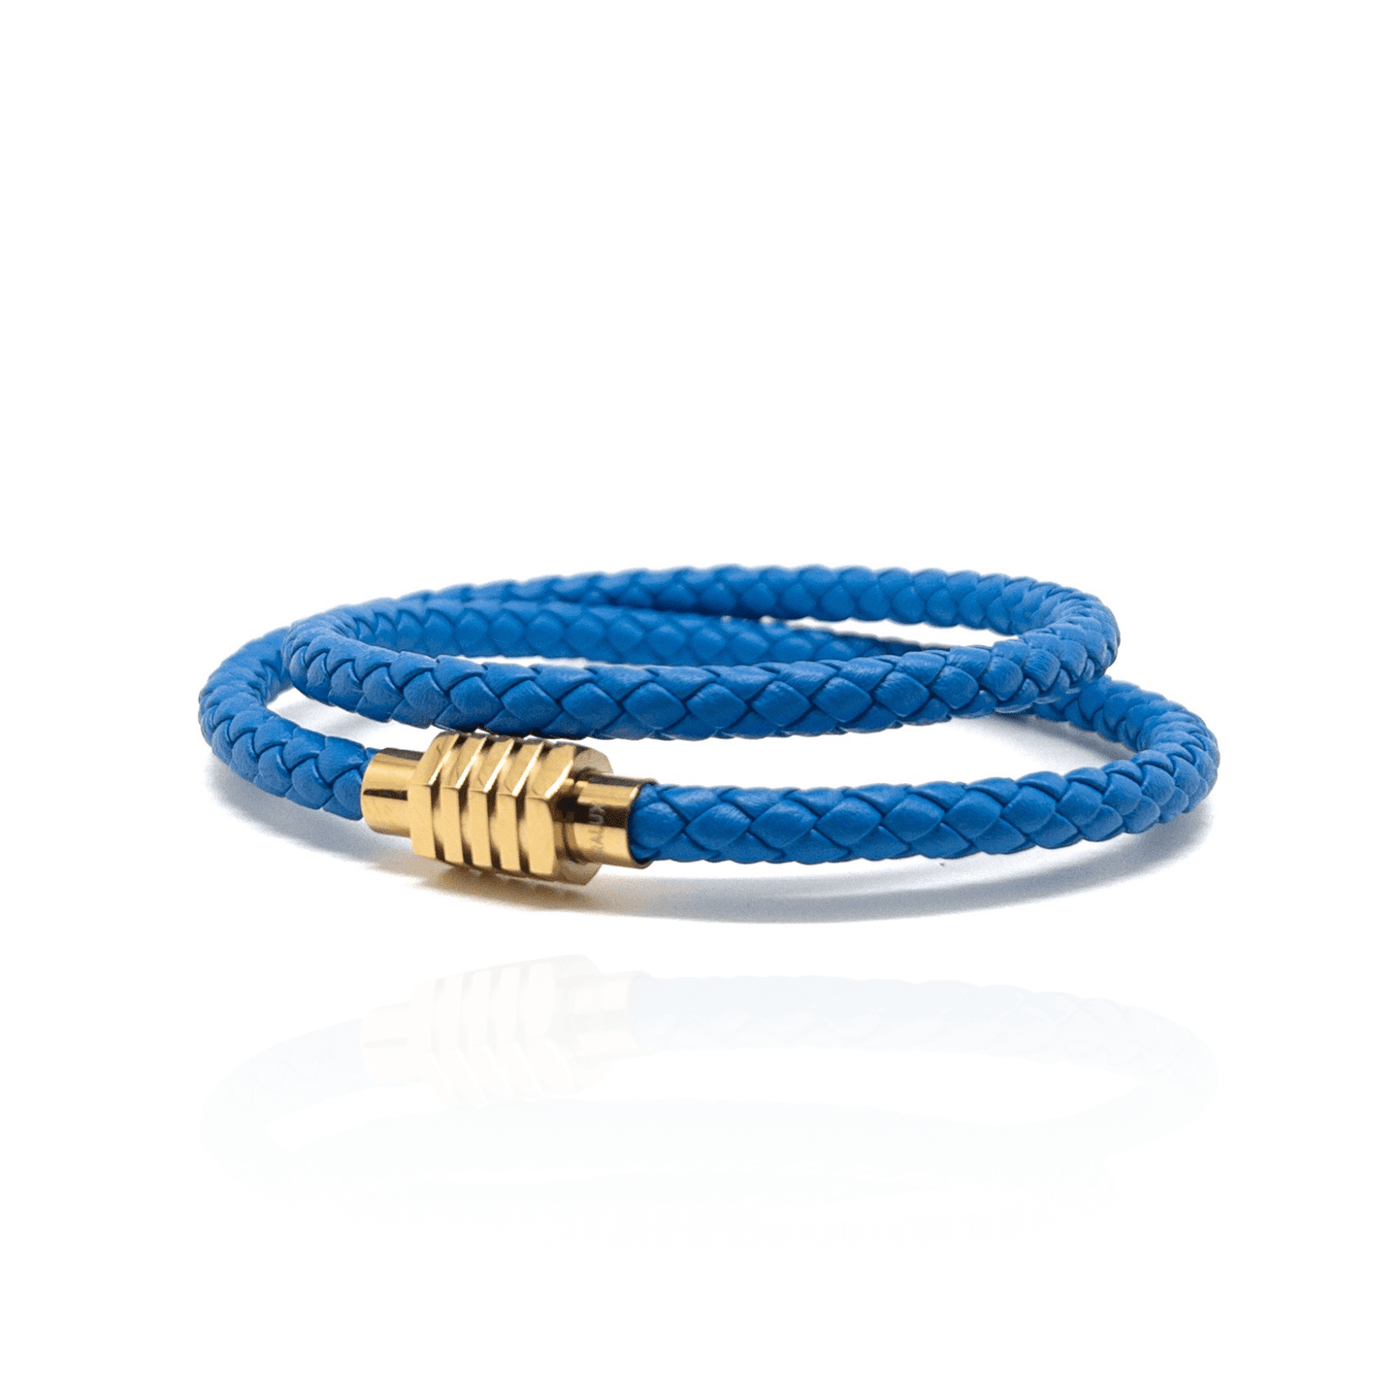 The Blue duo and Gold Plated Buckle Leather bracelet